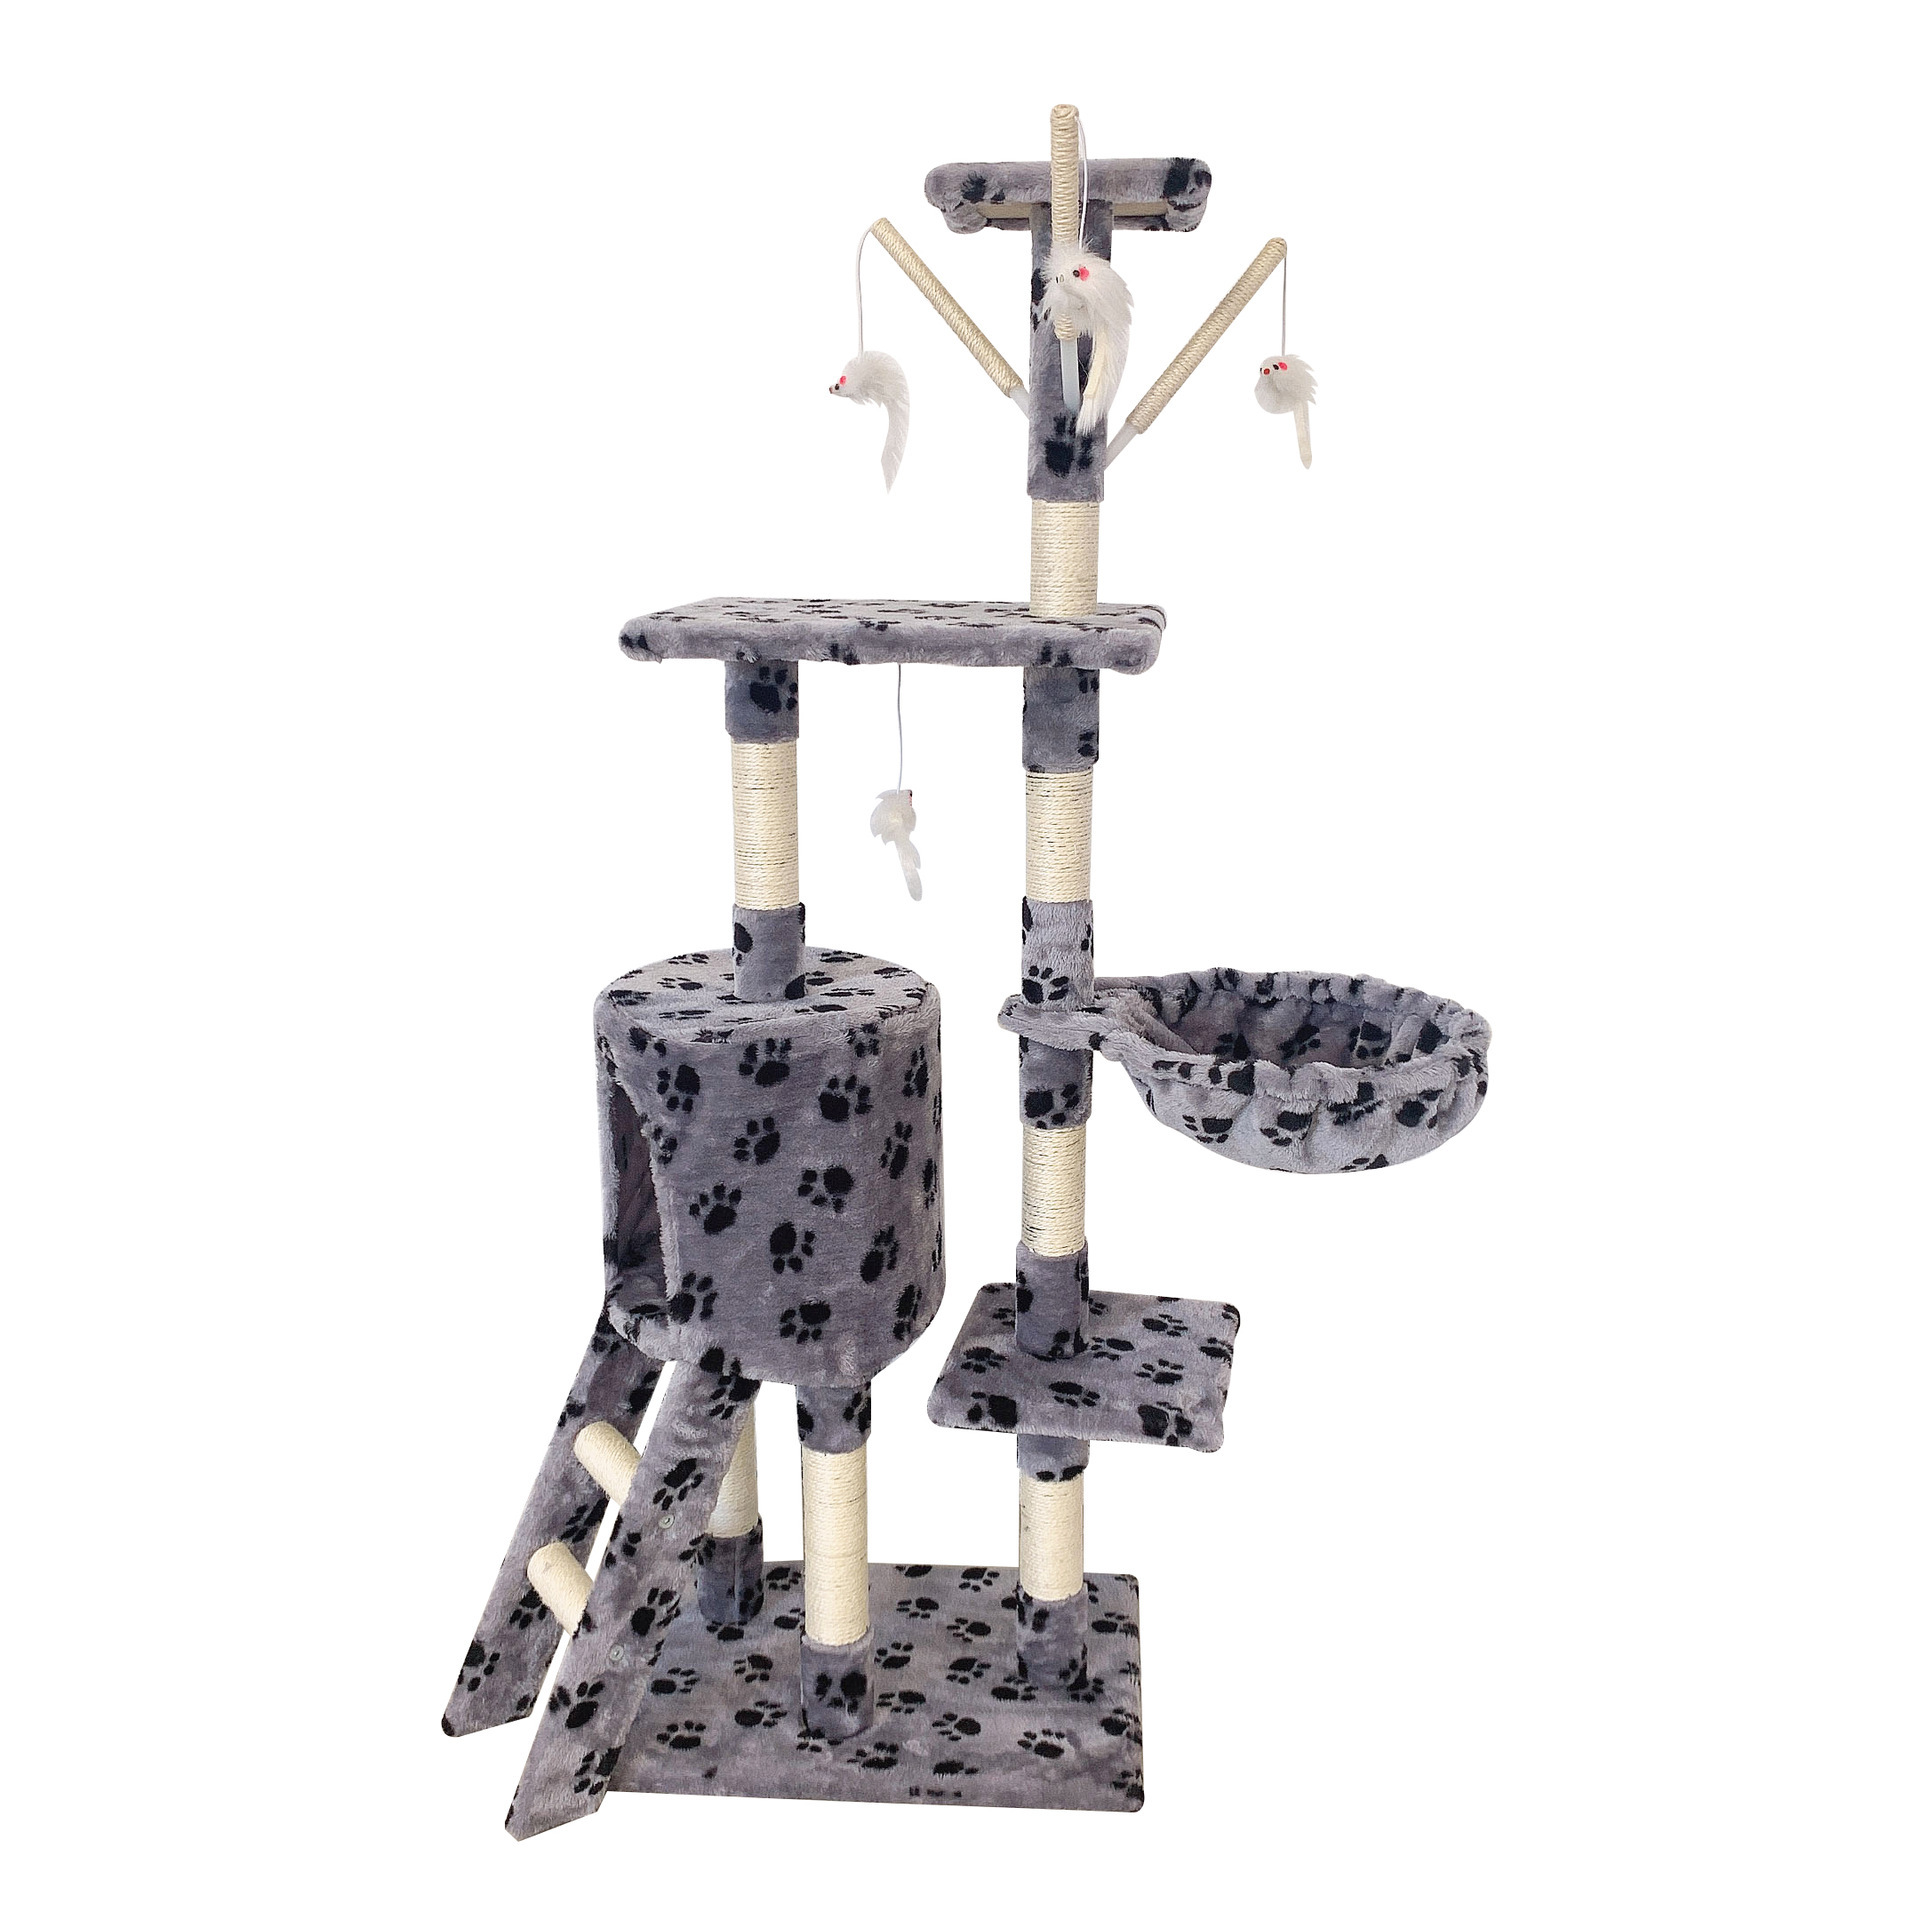 Large wooden five-story cat tree tower luxury pet grabbing column toy cat furniture toy cat tree